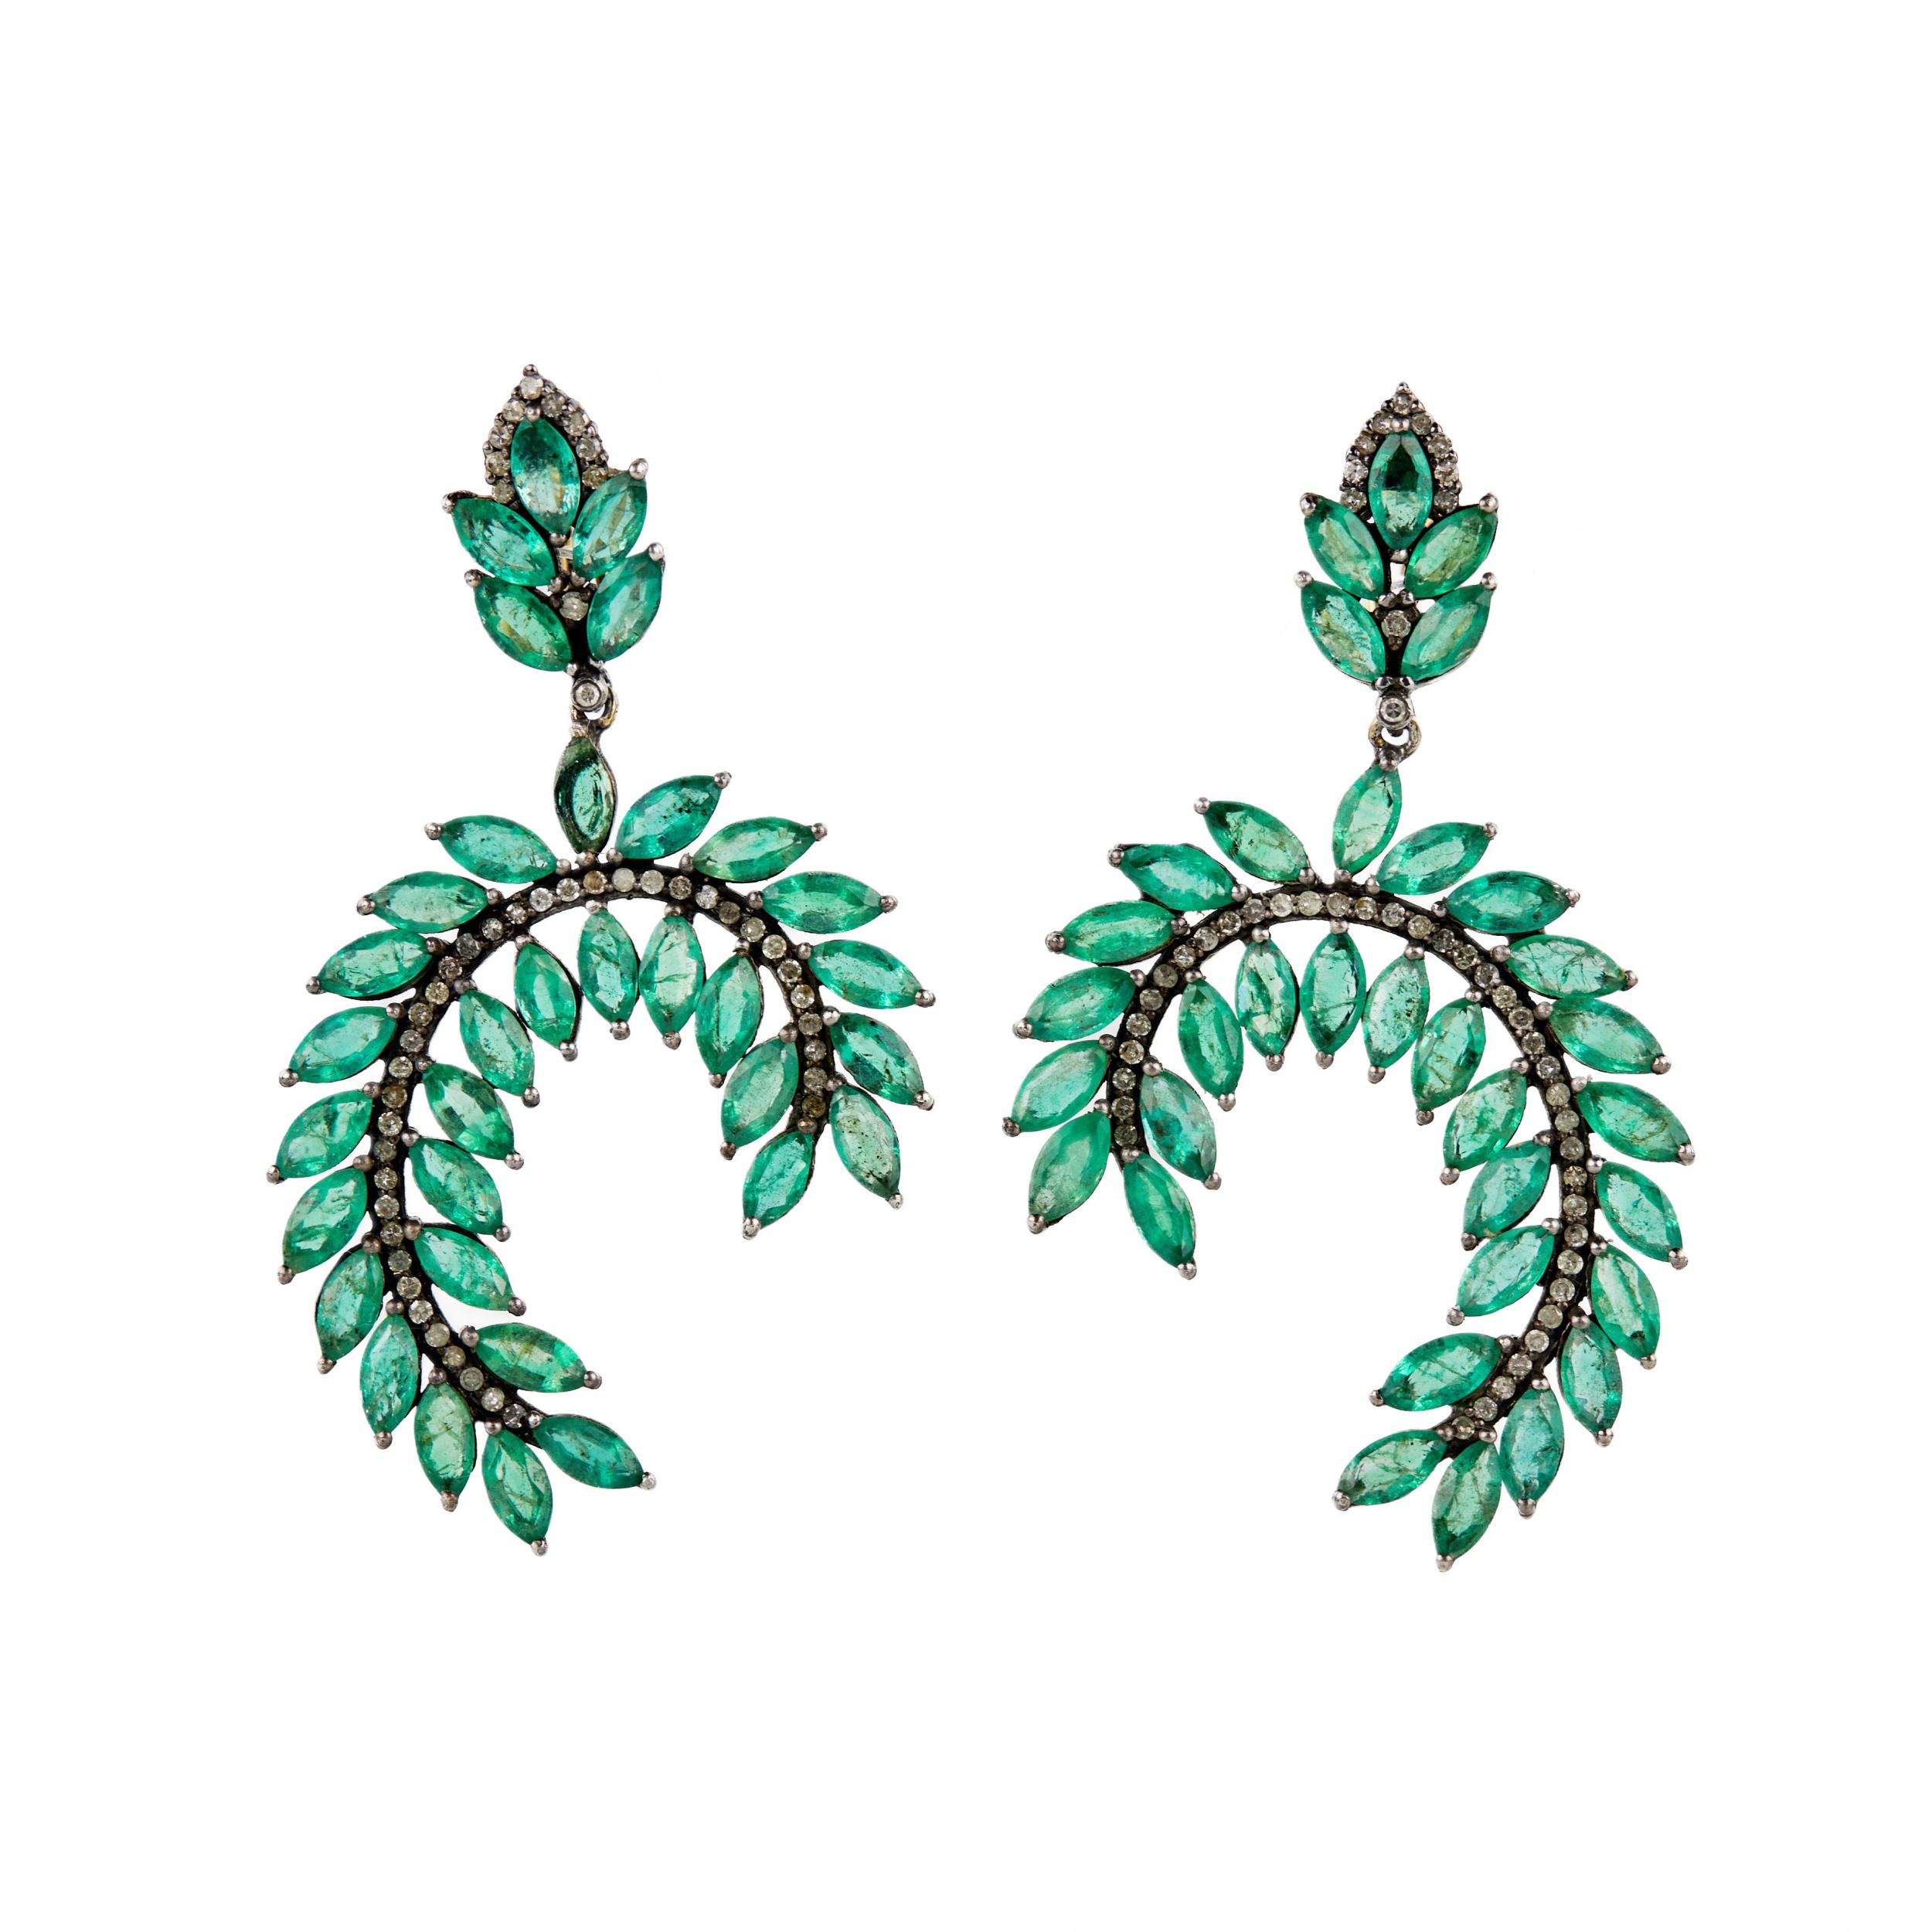 Silver earrings with emeralds and diamonds.